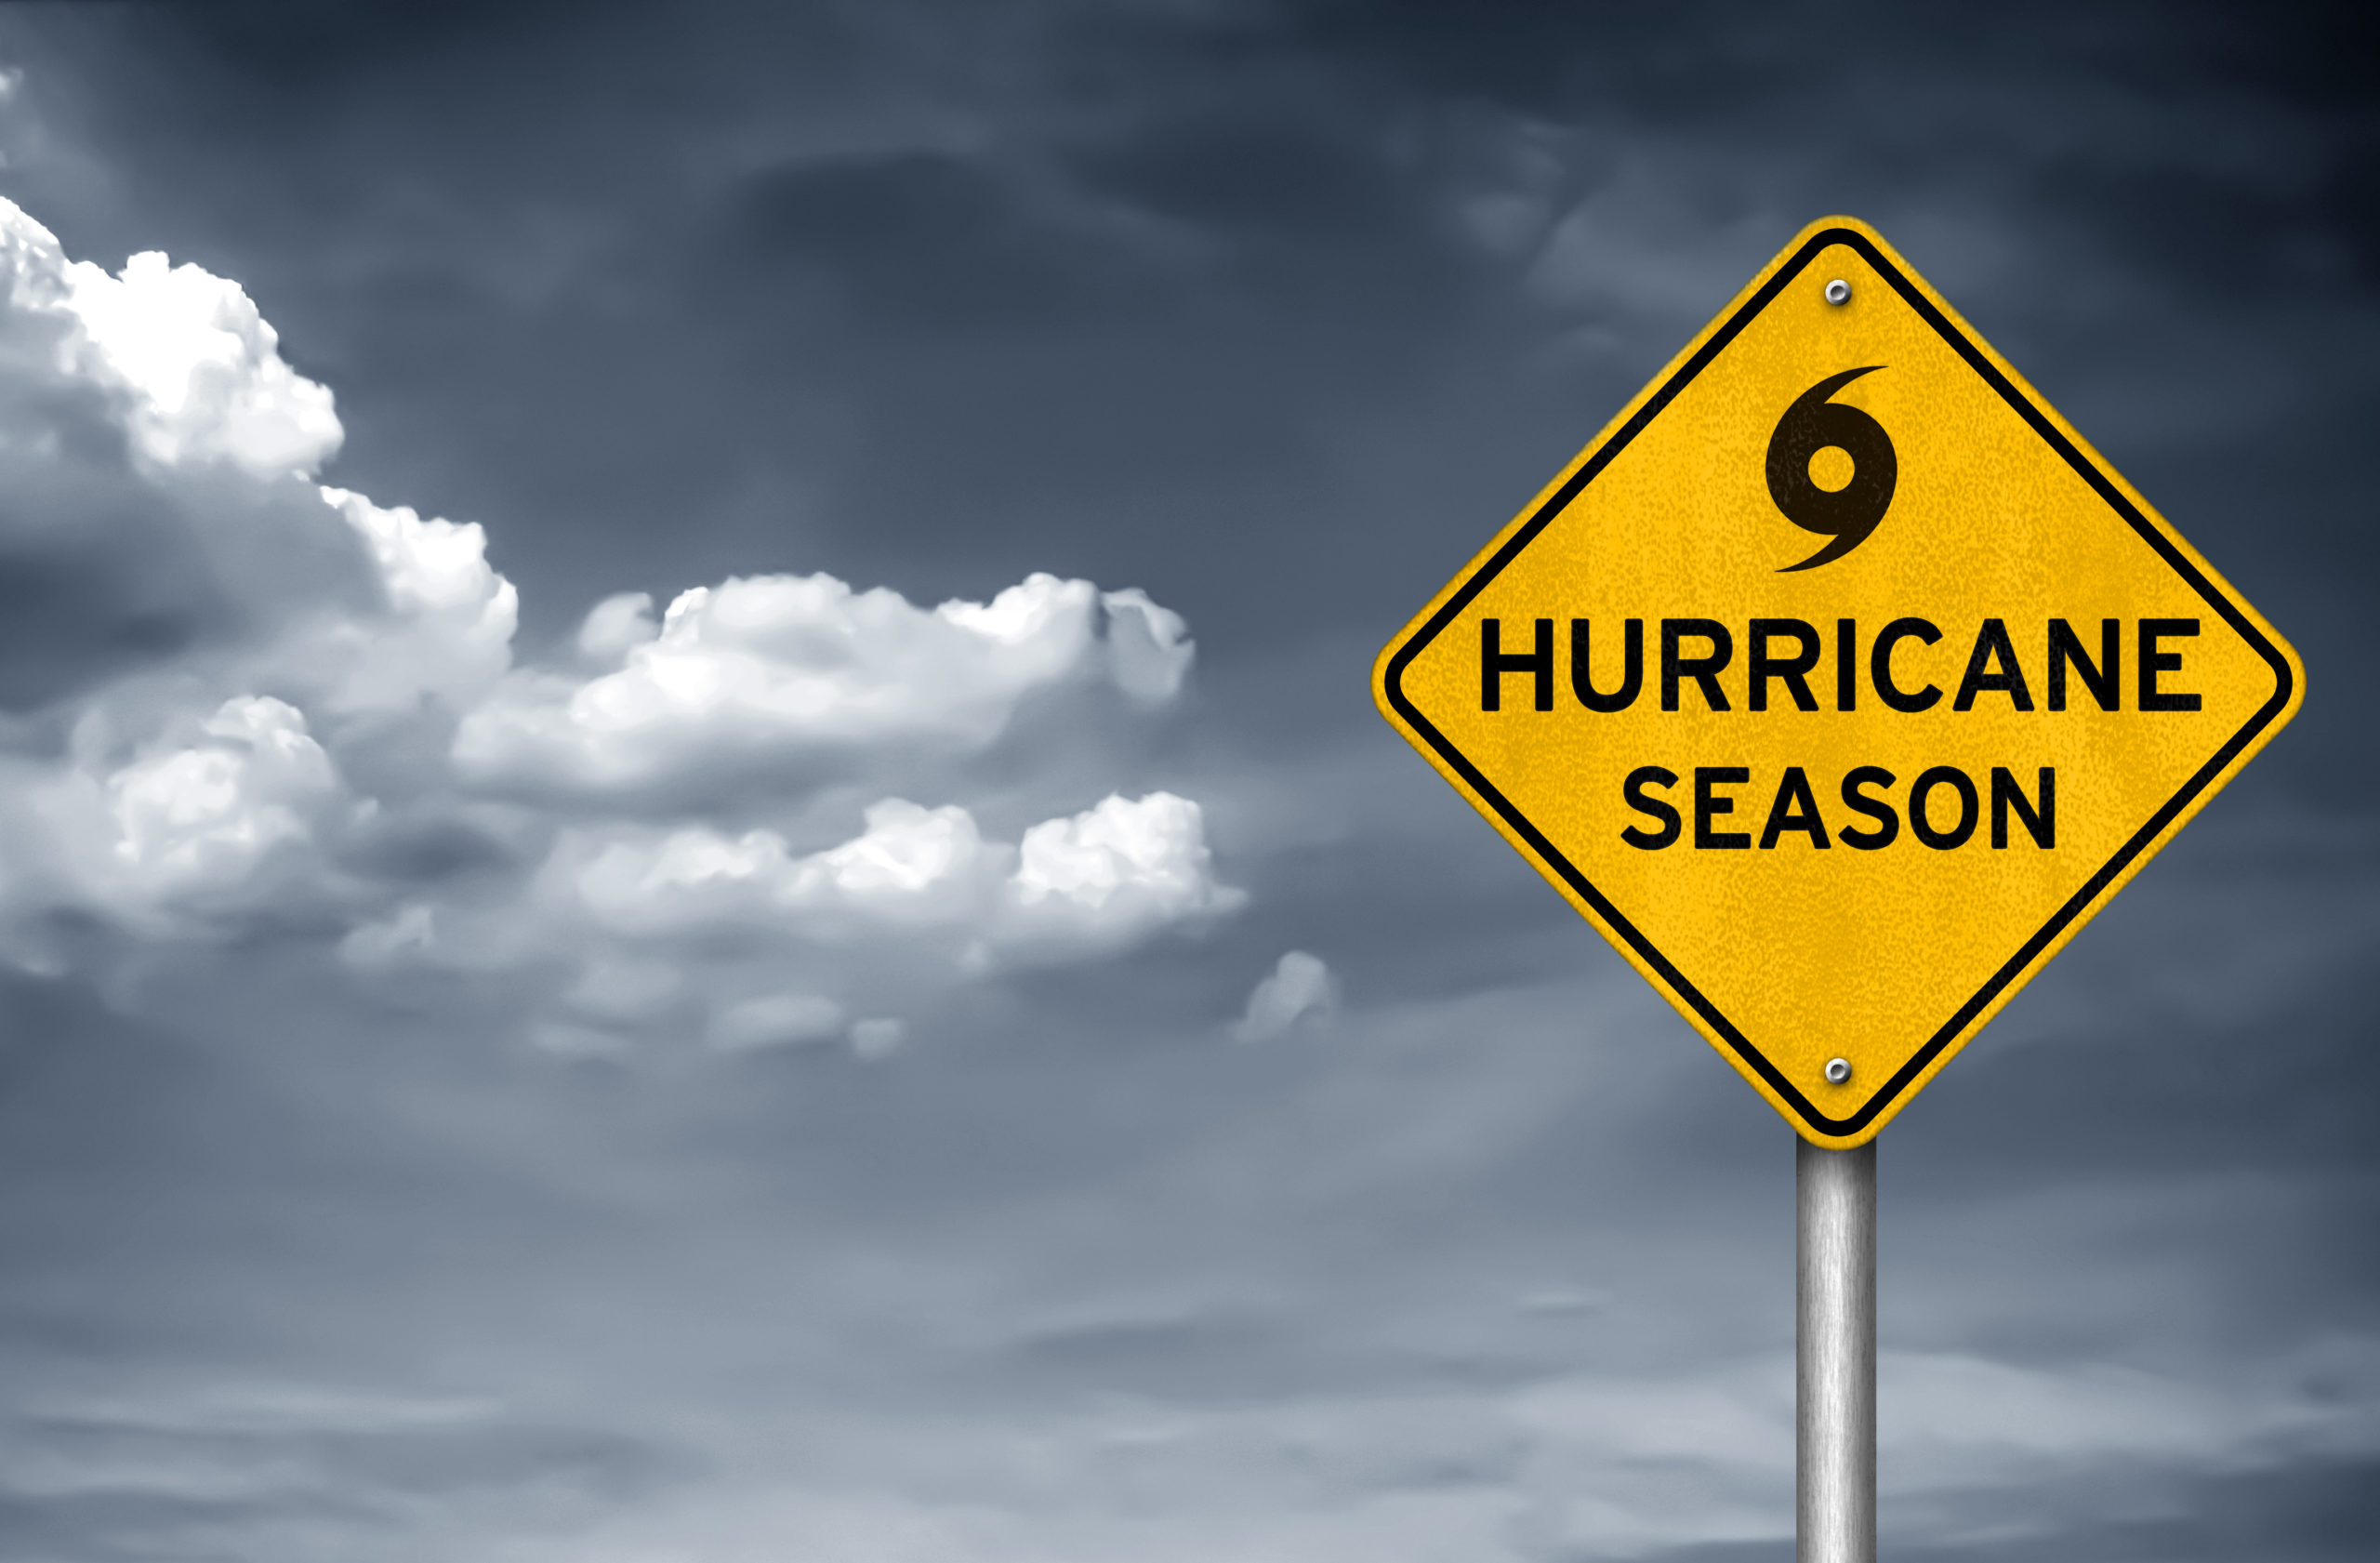 A sign that says "hurricane season" in front of dark, stormy skies